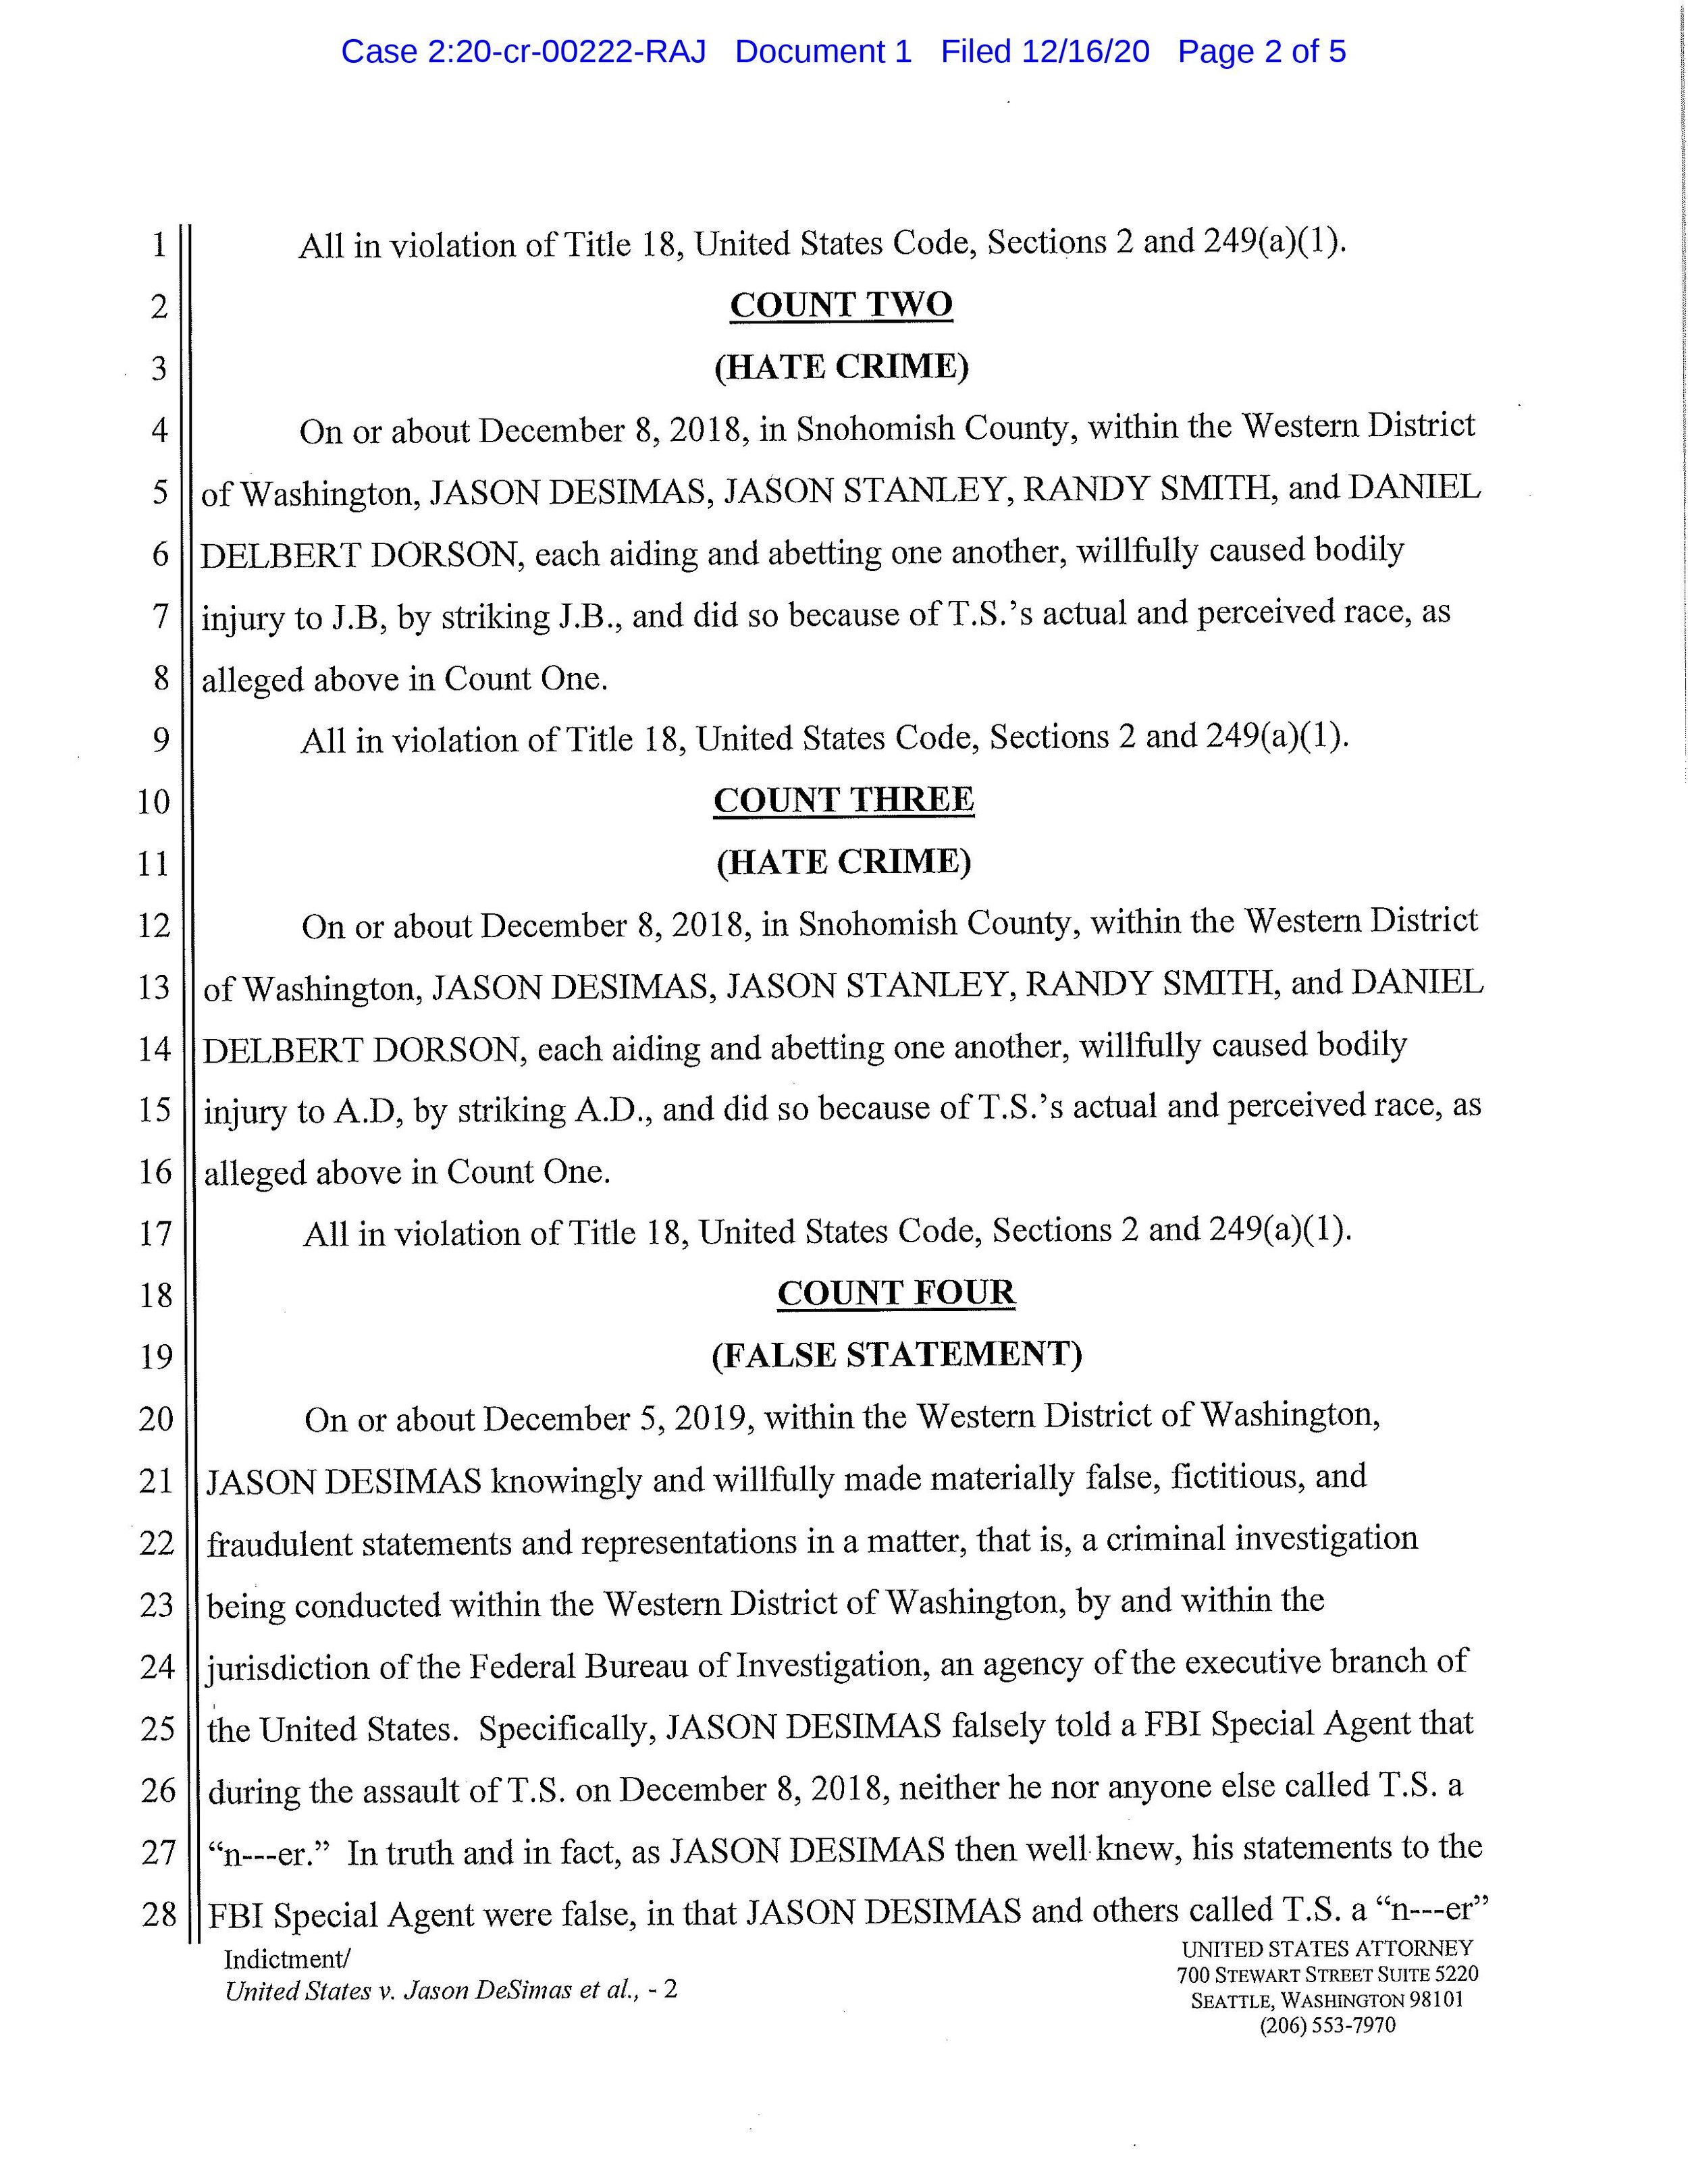 Indictment Page 2